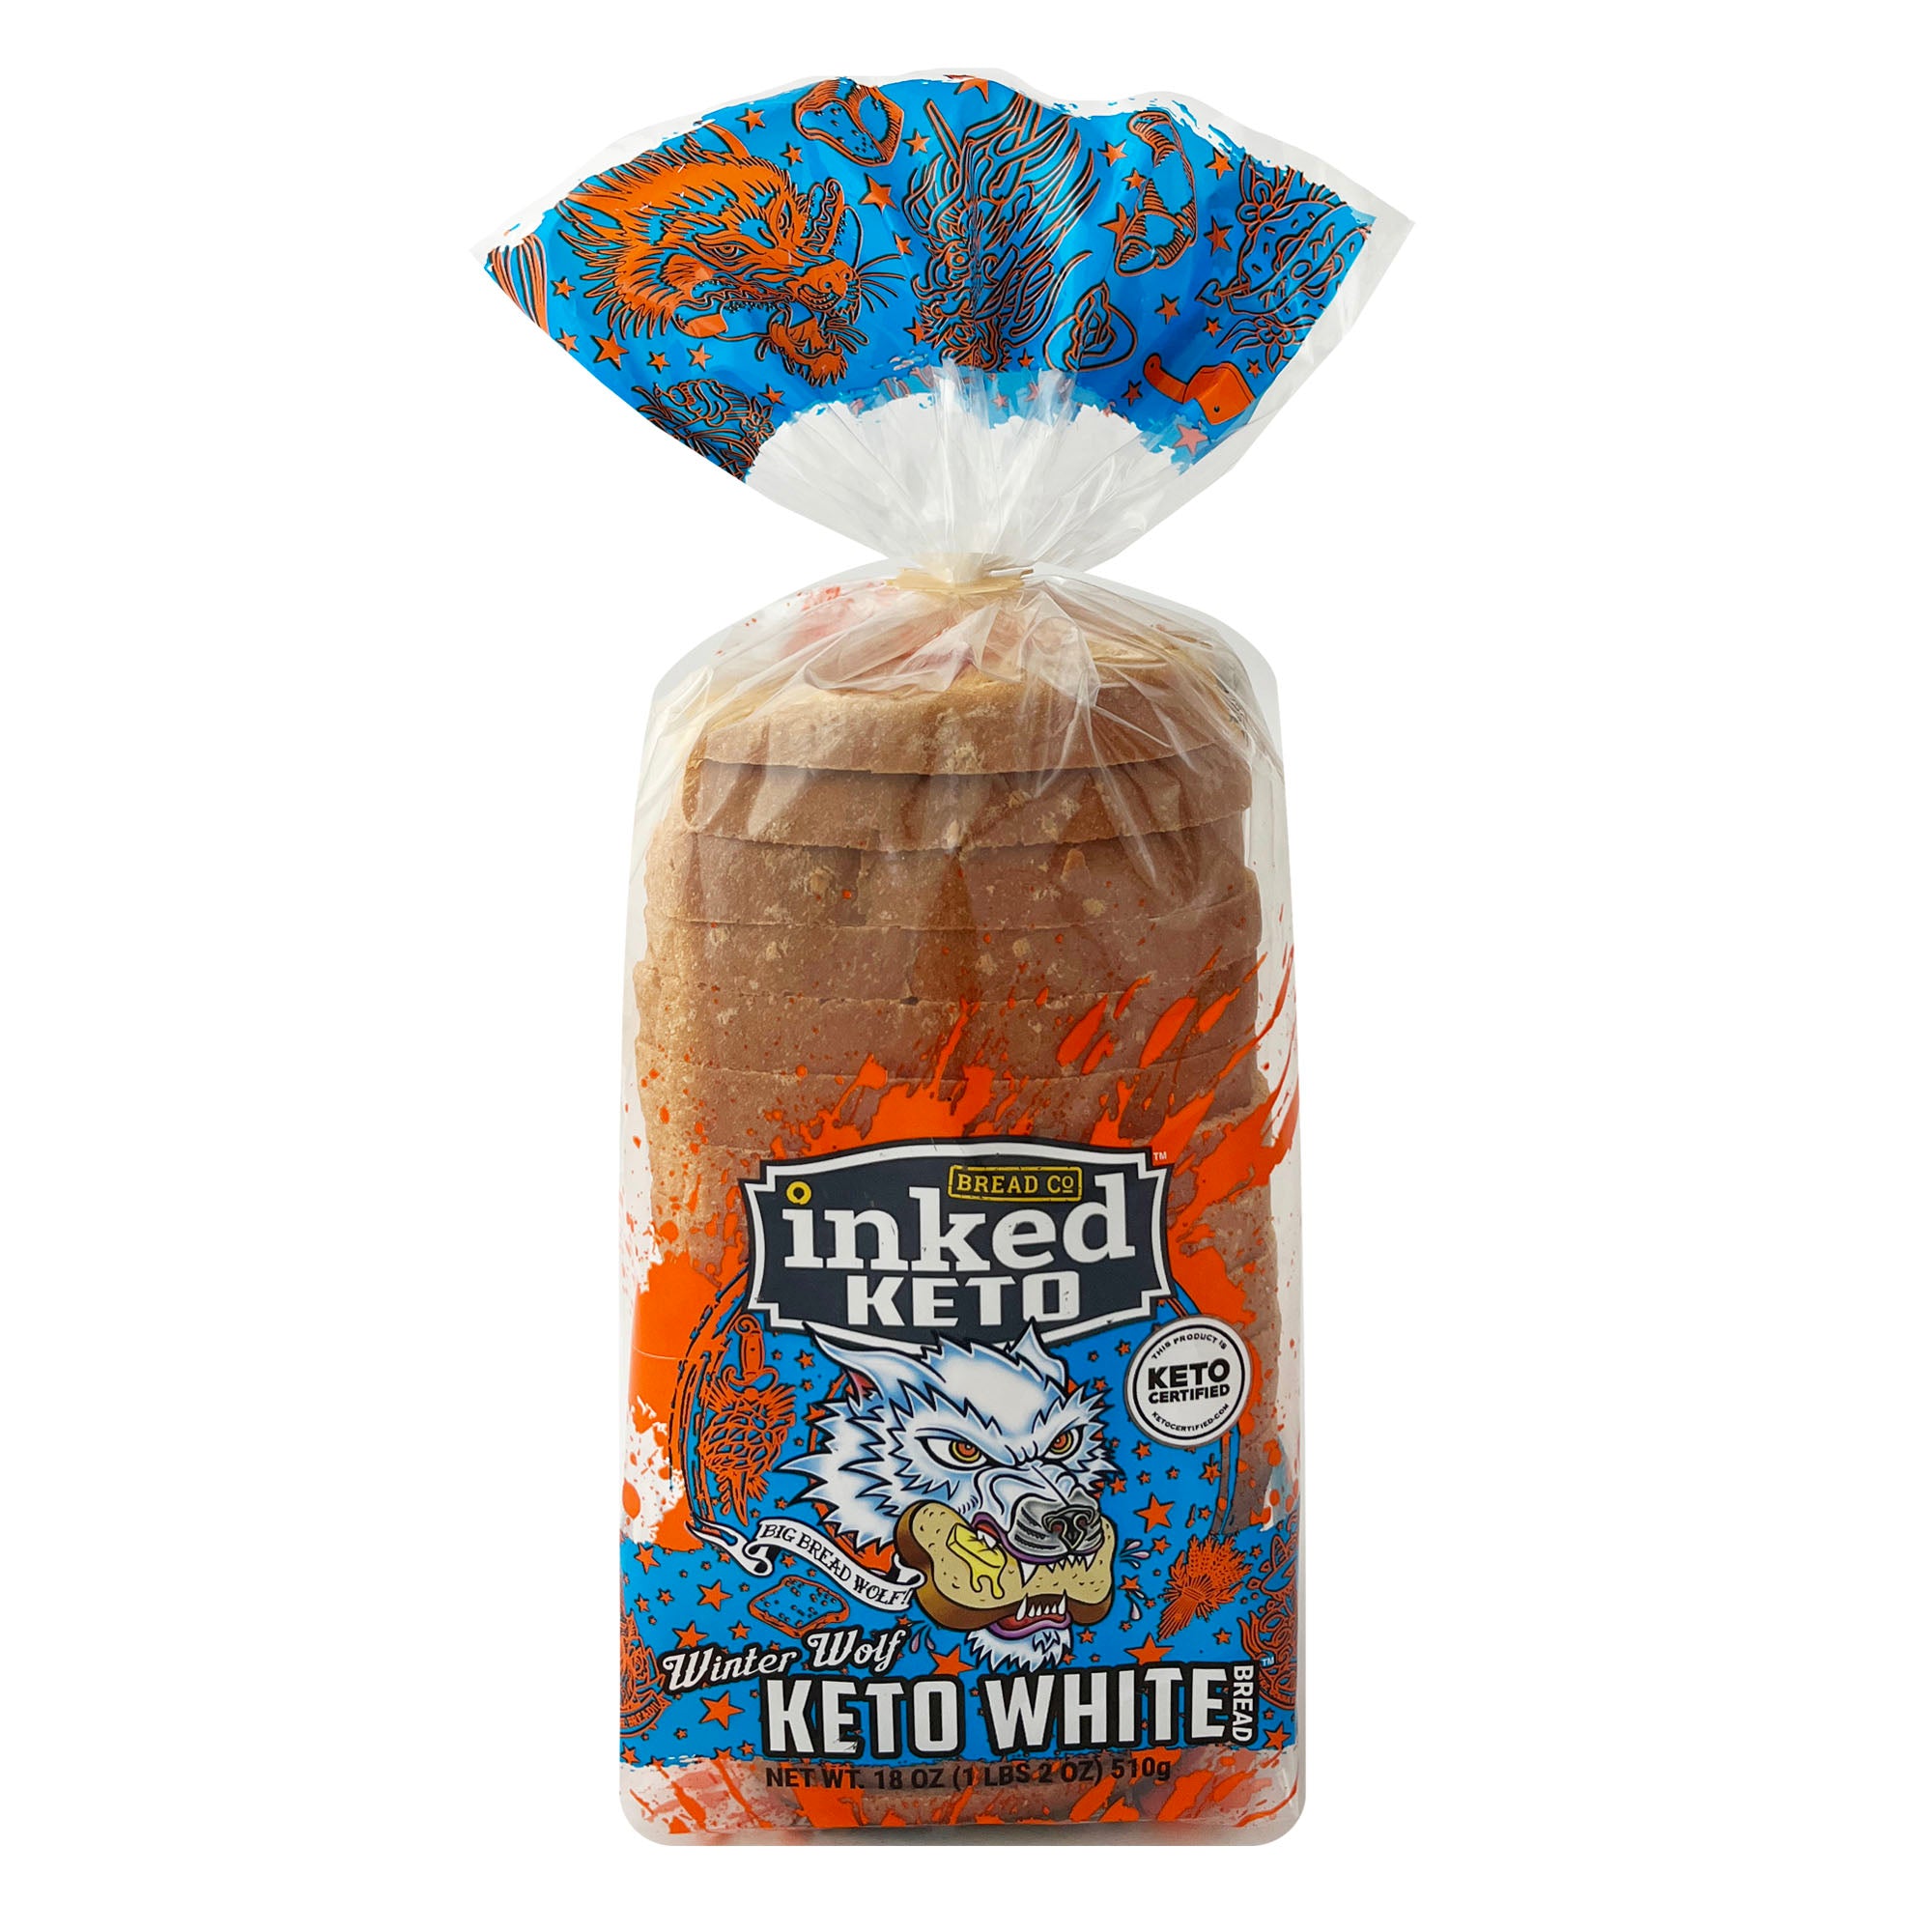 Winter Wolf Keto White Bread (Not available for individual sale)